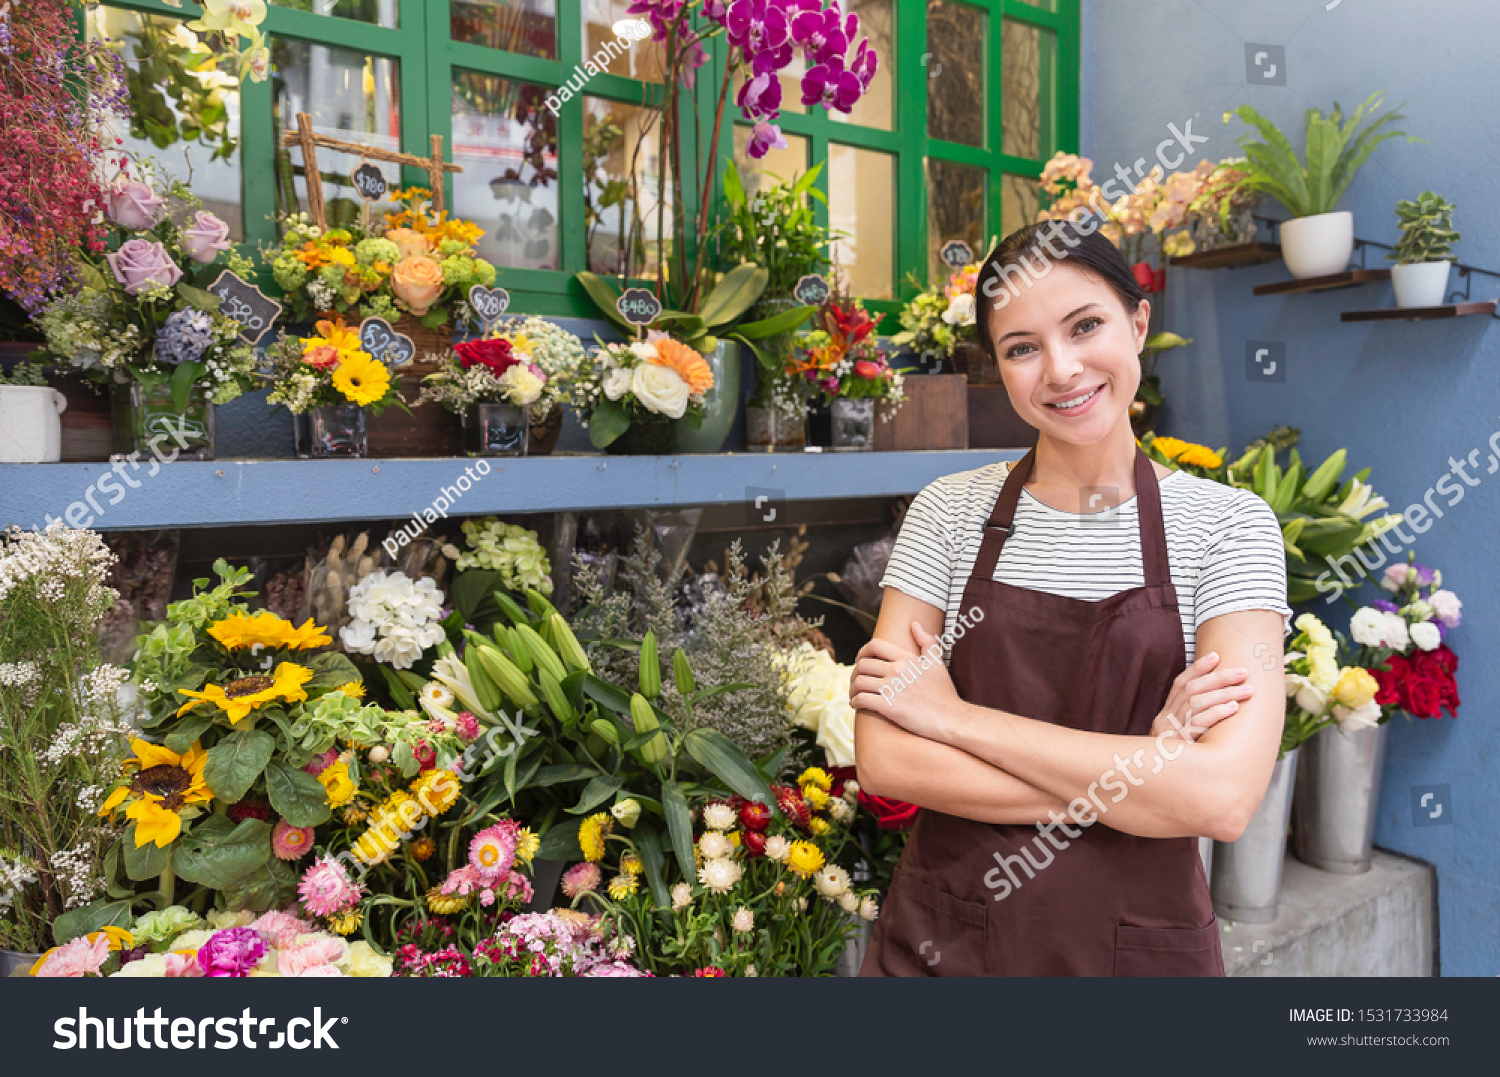 Startup successful sme small business entrepreneur owner asian woman standing with flowers at florist shop. Portrait of caucasian girl successful owner environment friendly concept with copy space #1531733984